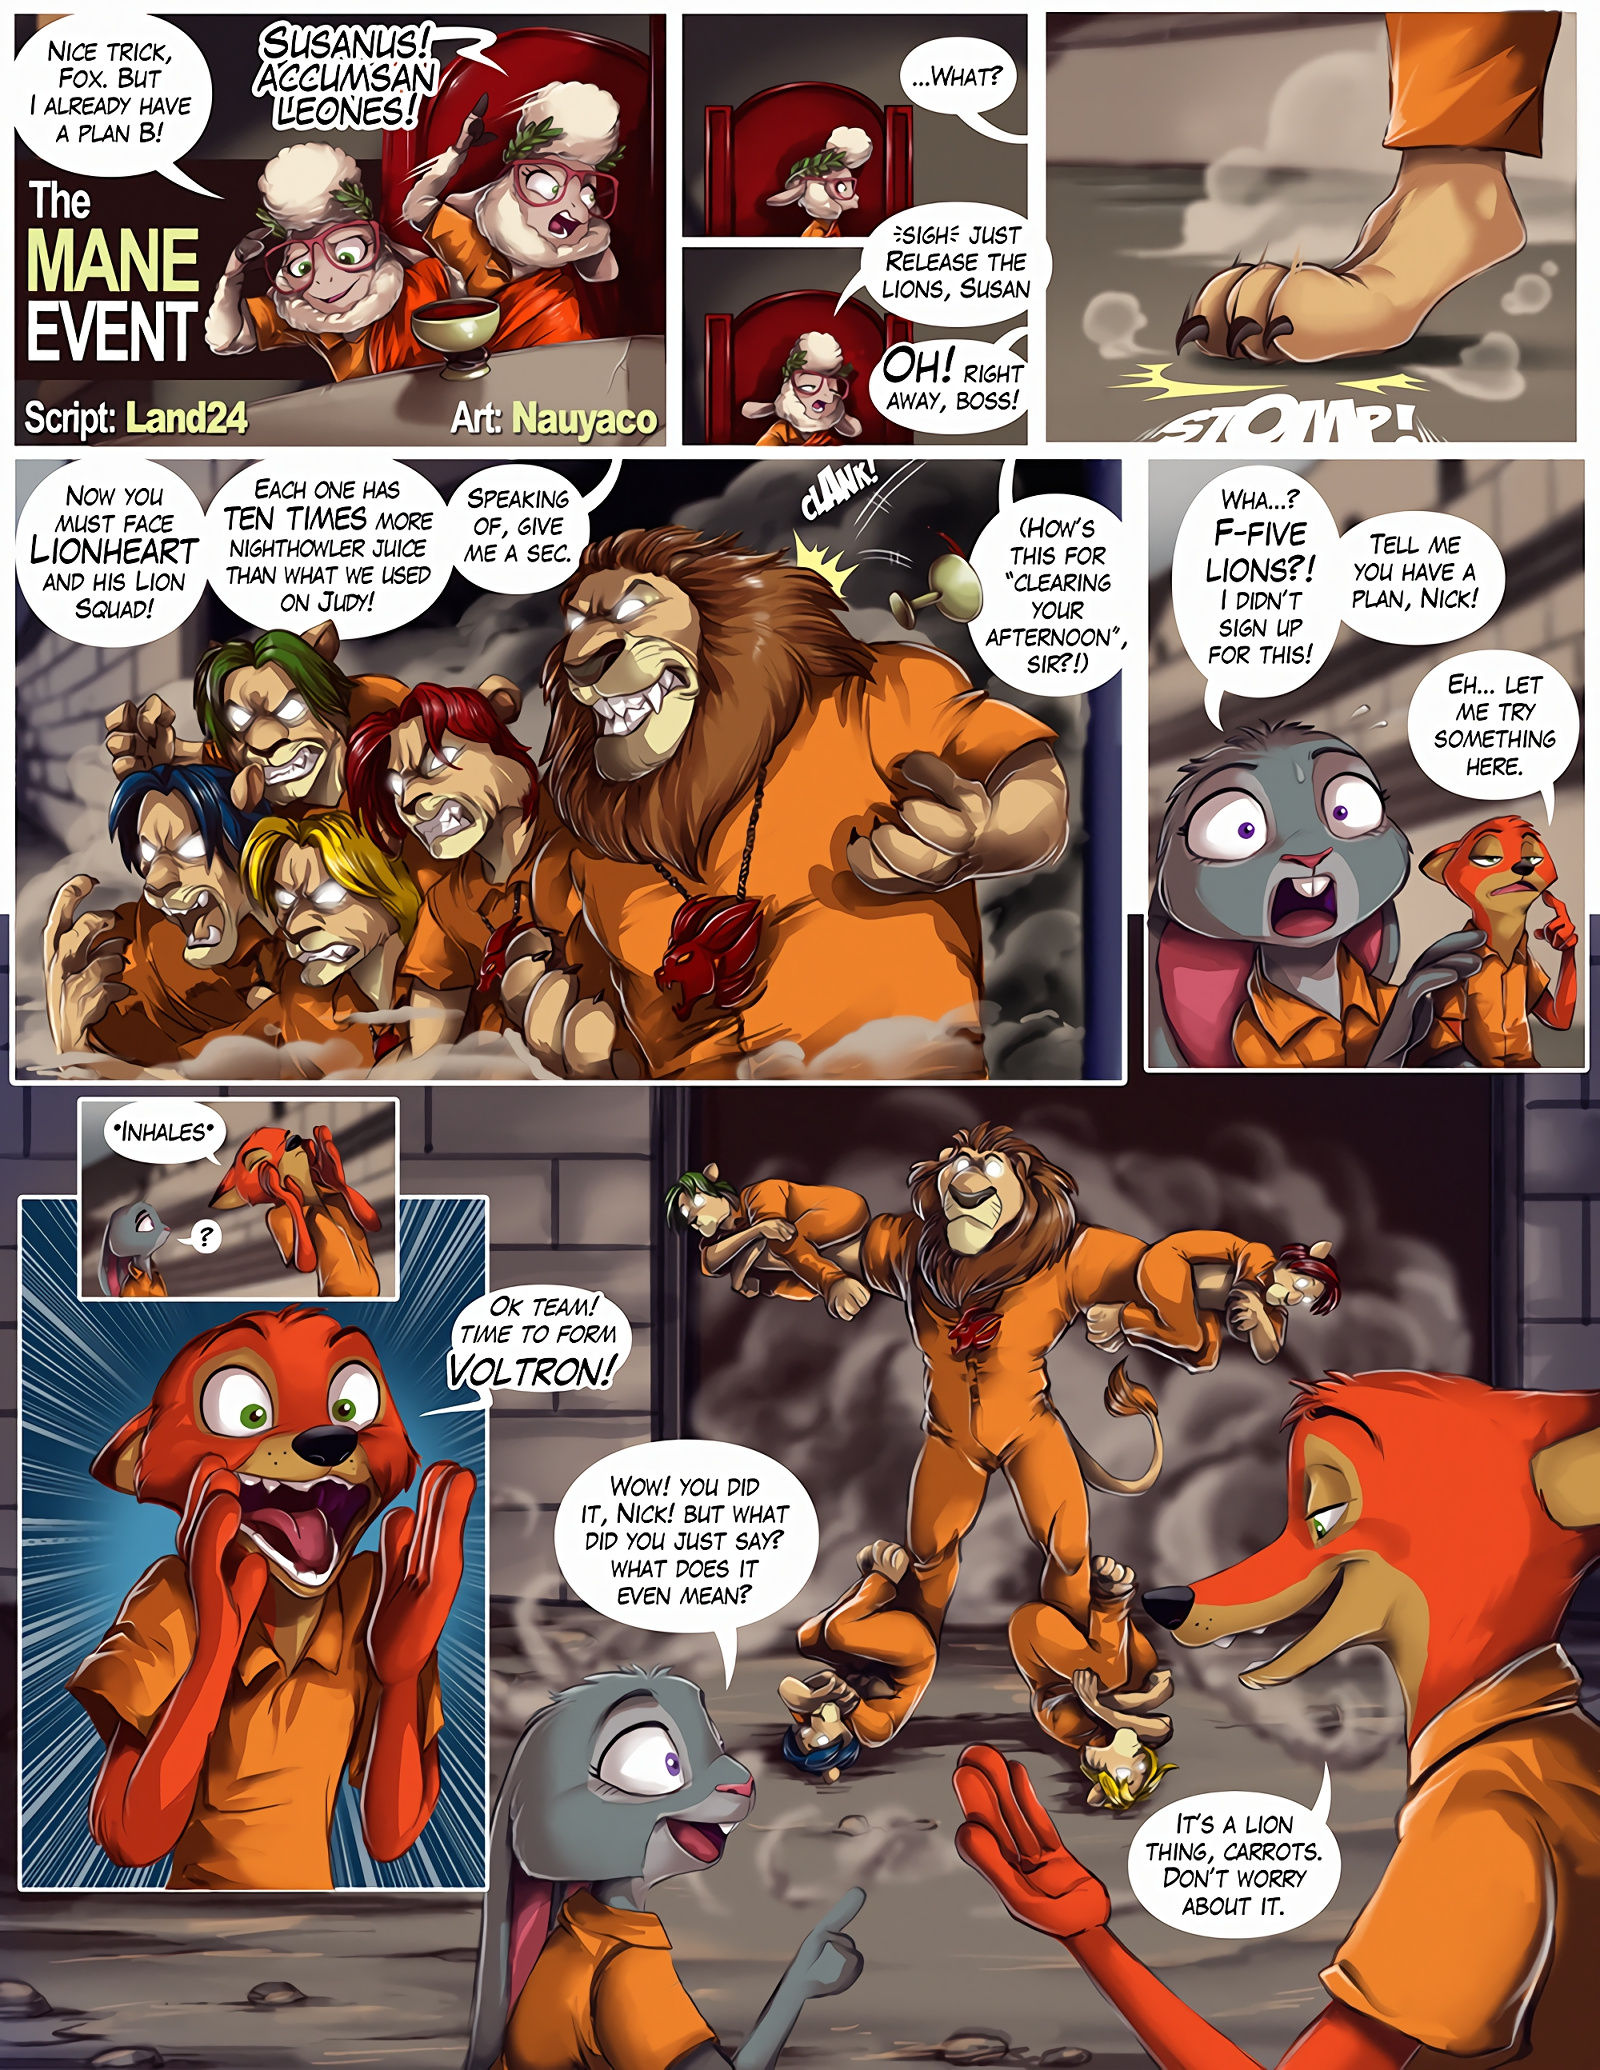 Guilty judy and nick go to jail porn comic picture 19